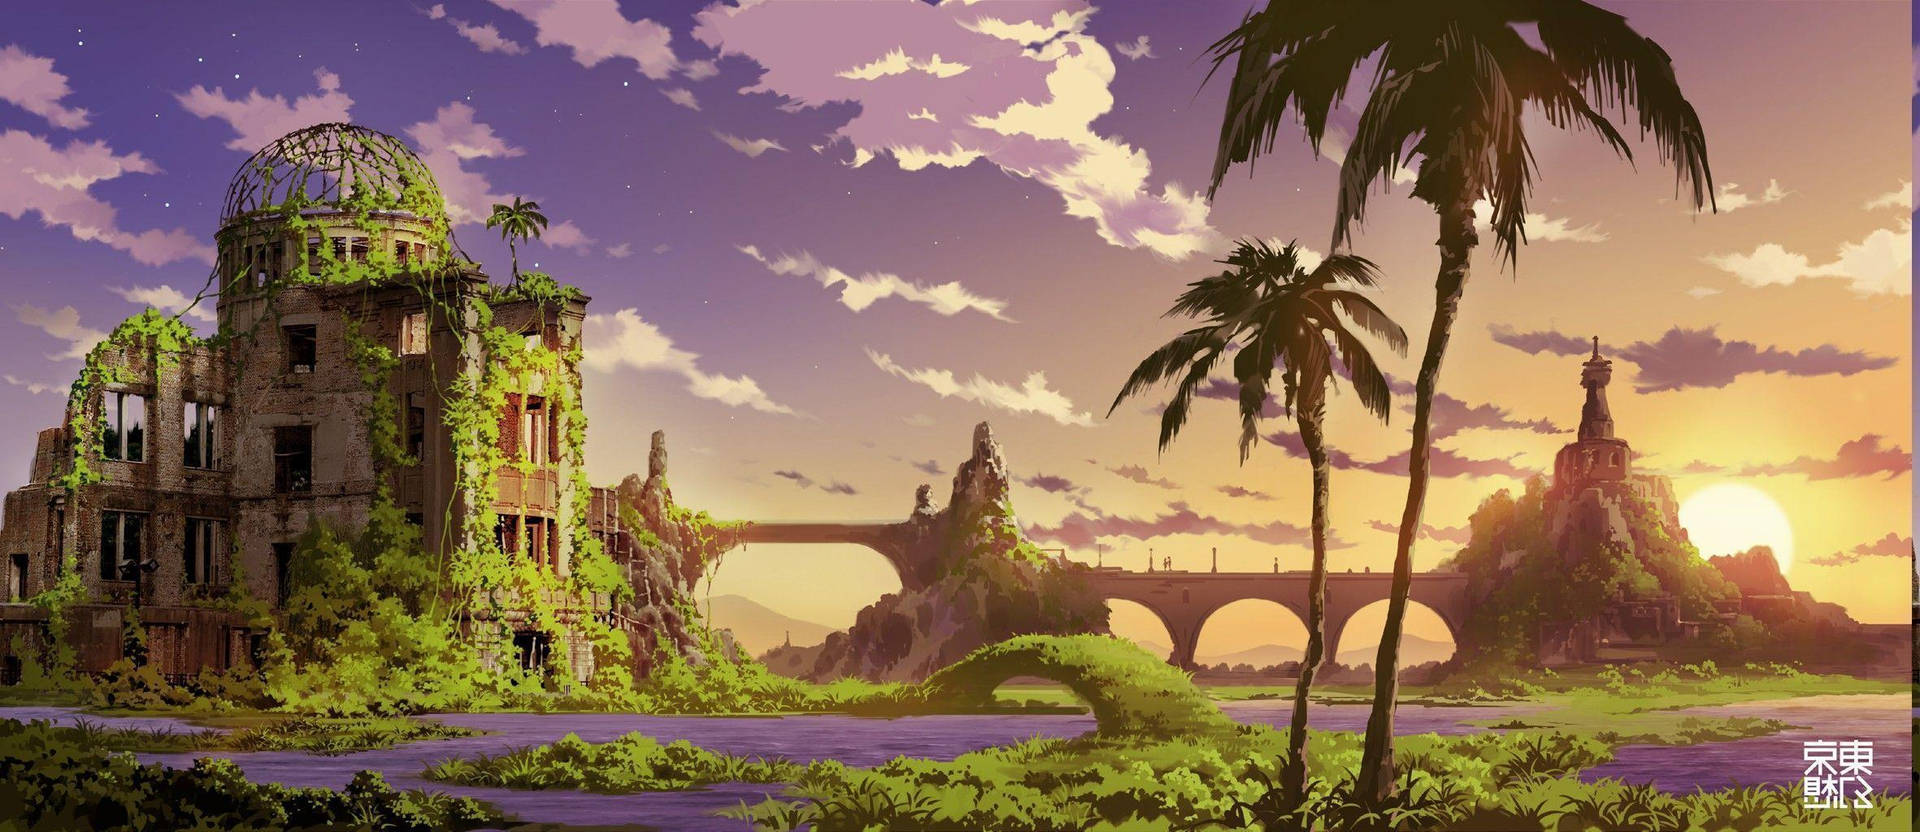 2362X1023 Anime Landscape Wallpaper and Background